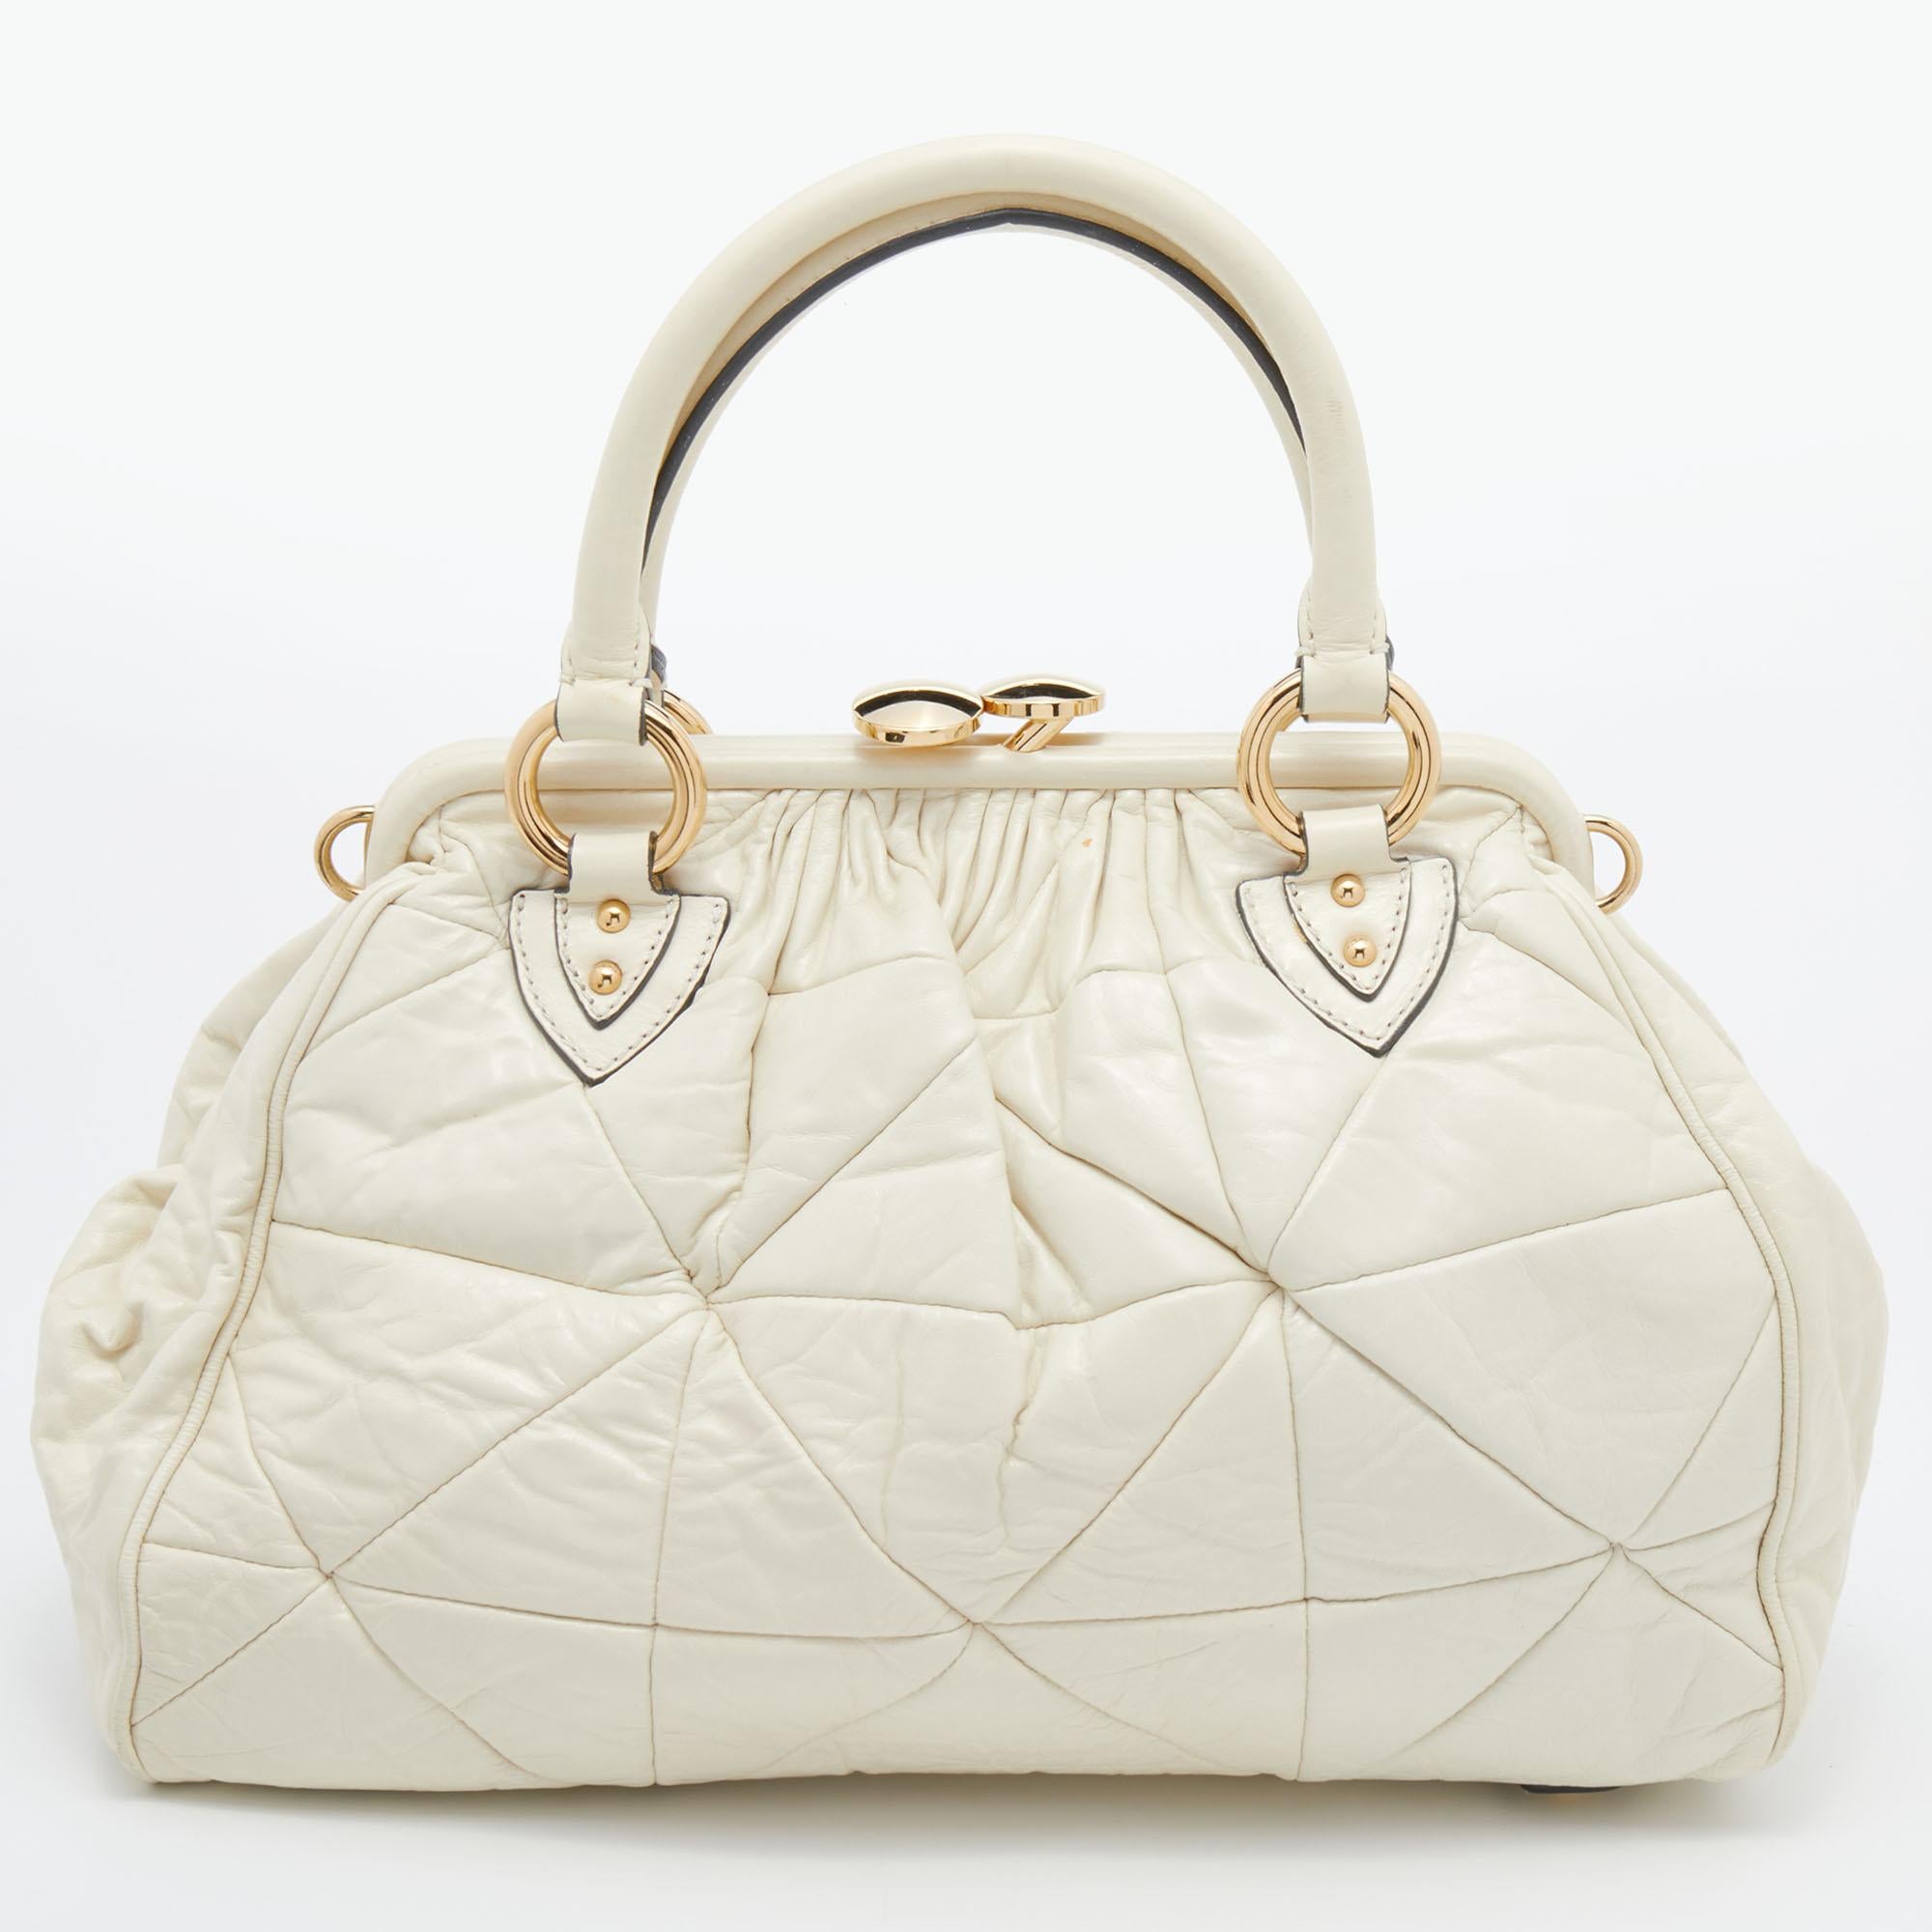 This Marc Jacobs design has a cream quilted exterior crafted from leather and enhanced with gold-tone hardware. The elegant Stam bag features a kiss-lock top closure, a fabric interior, dual top handles, and a removable strap that converts this